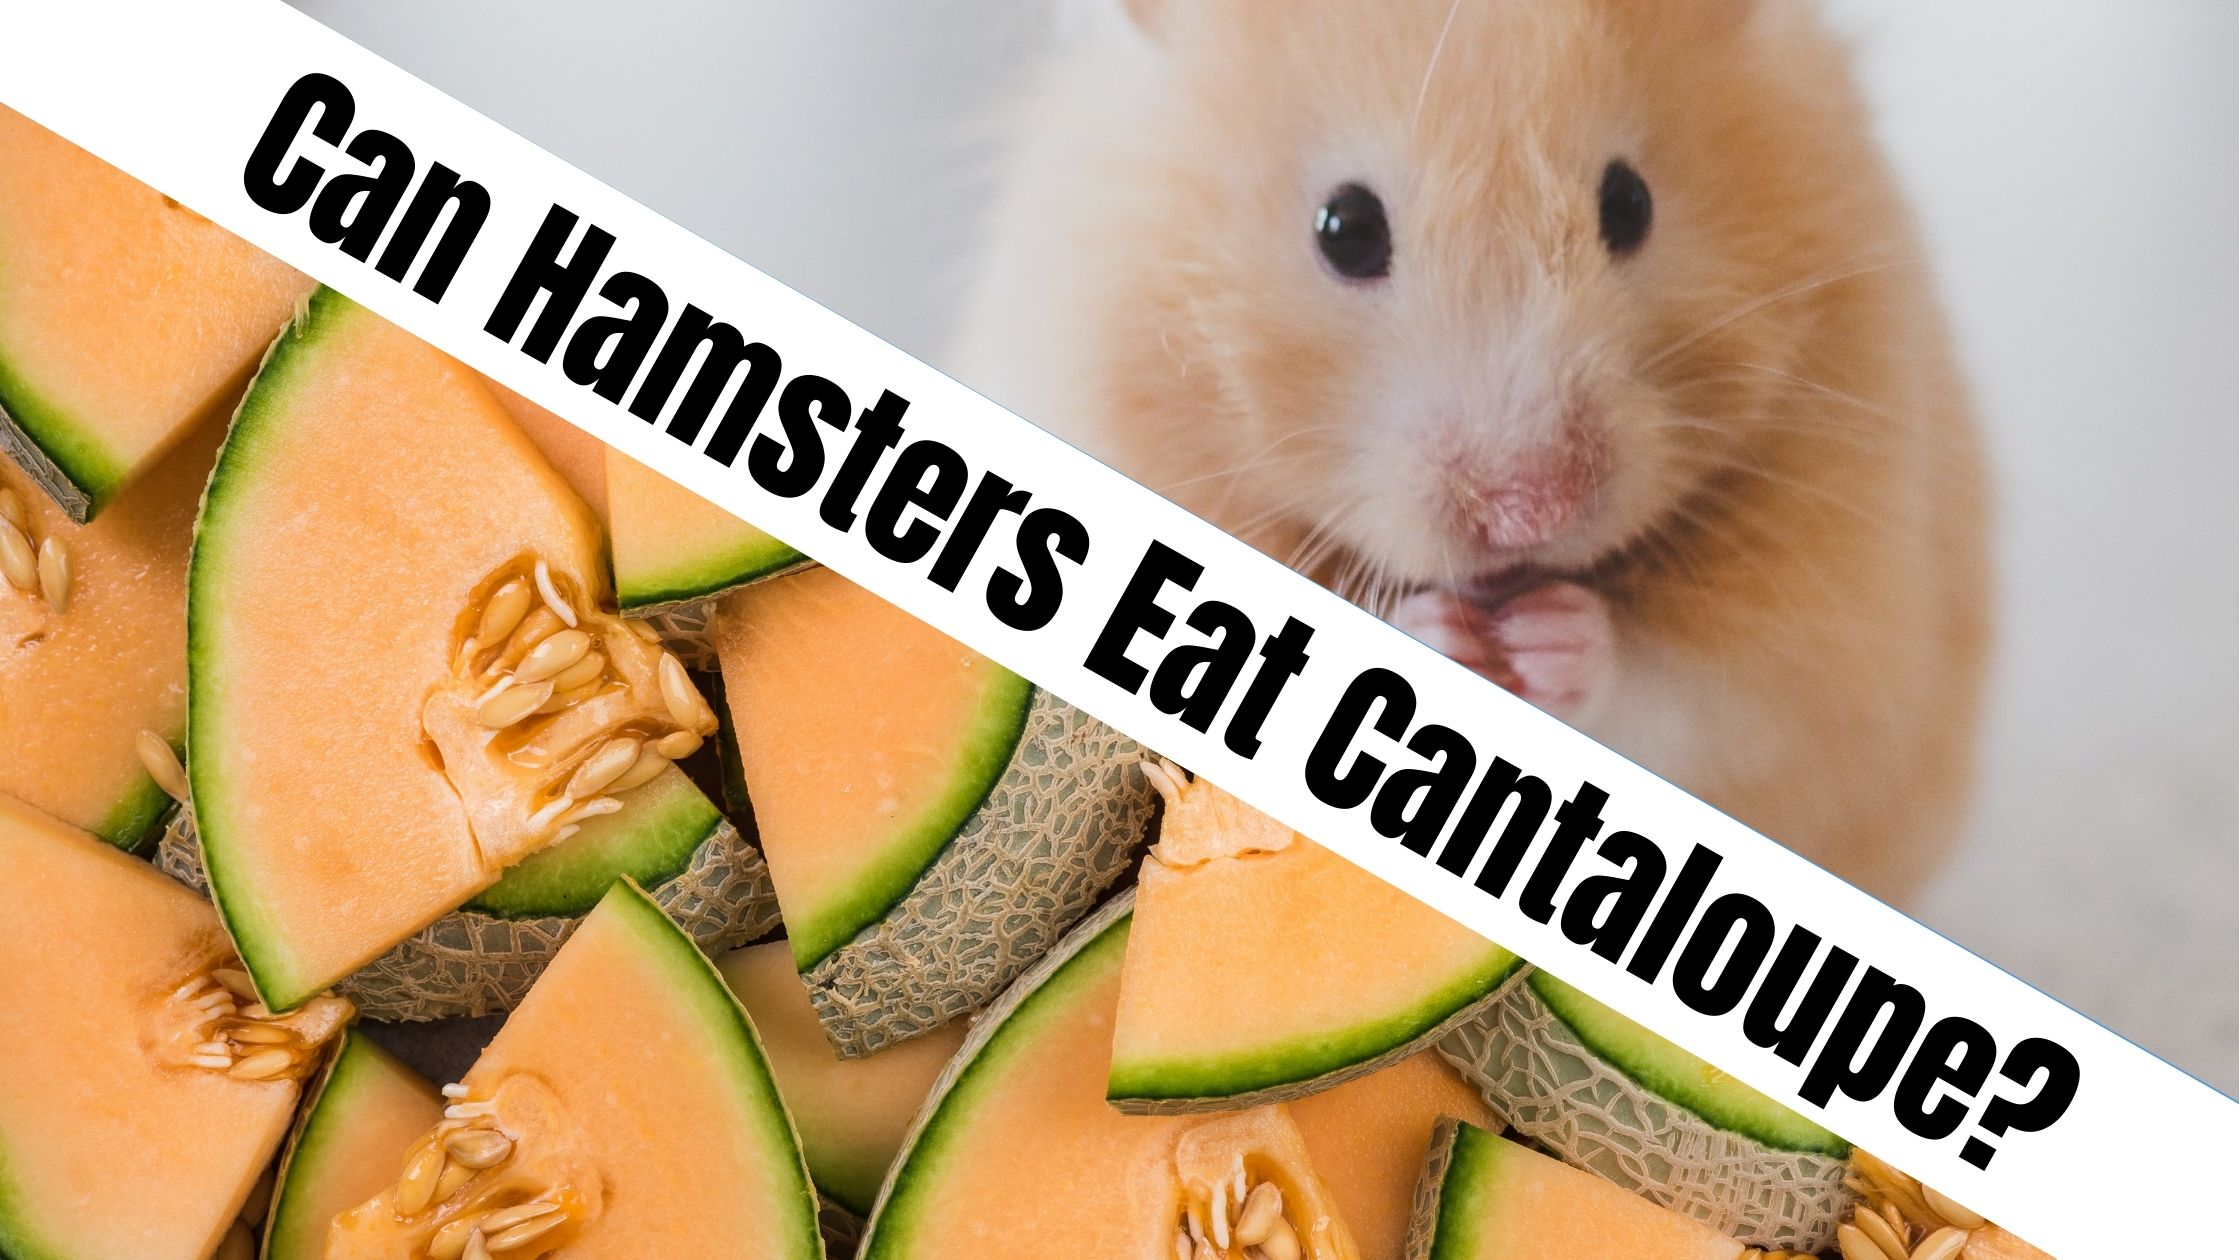 Can Hamsters Eat Cantaloupe?